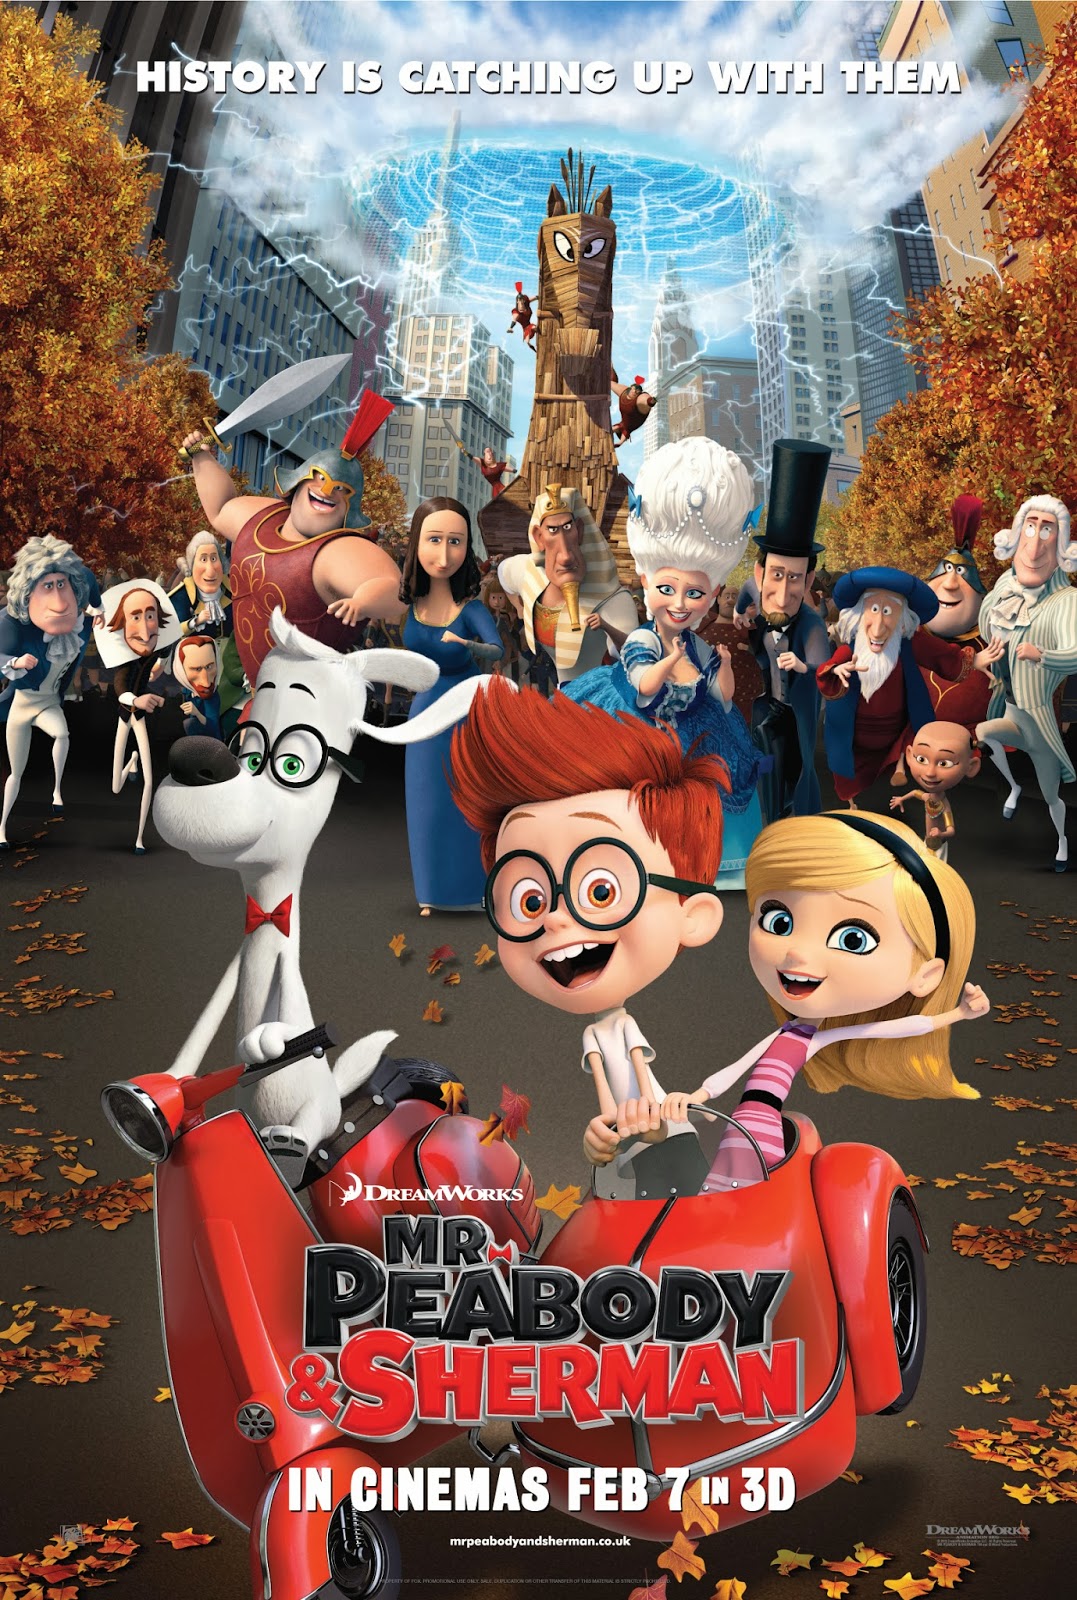 http://mondeanimation.blogspot.com/2014/03/review-dreamworks-mr-peabody-and-sherman.html